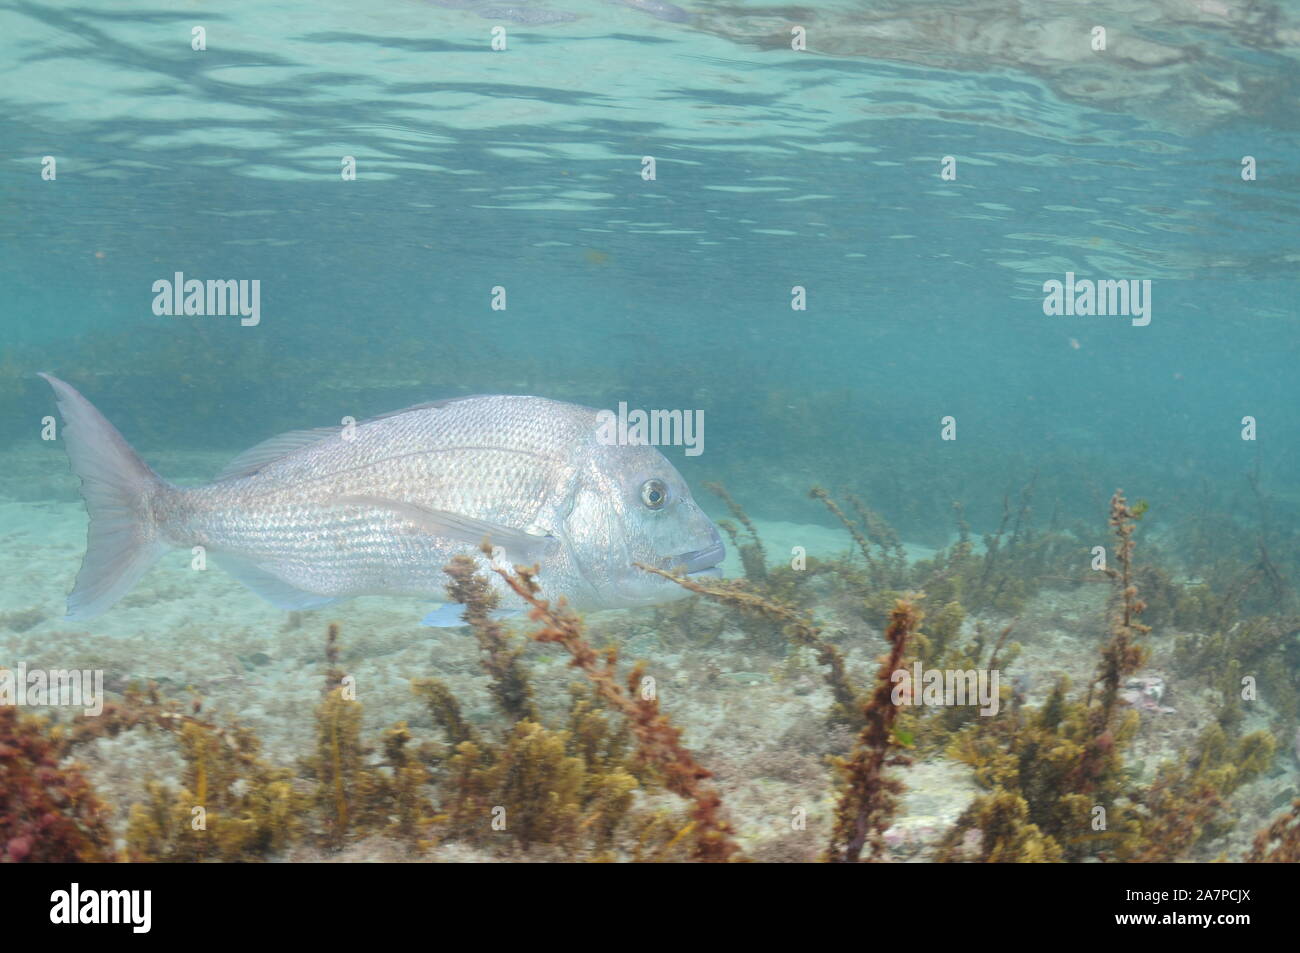 Large adult Australasian snapper Pagrus auratus swimming among short alga above flat rocky bottom in very shallow water. Stock Photo